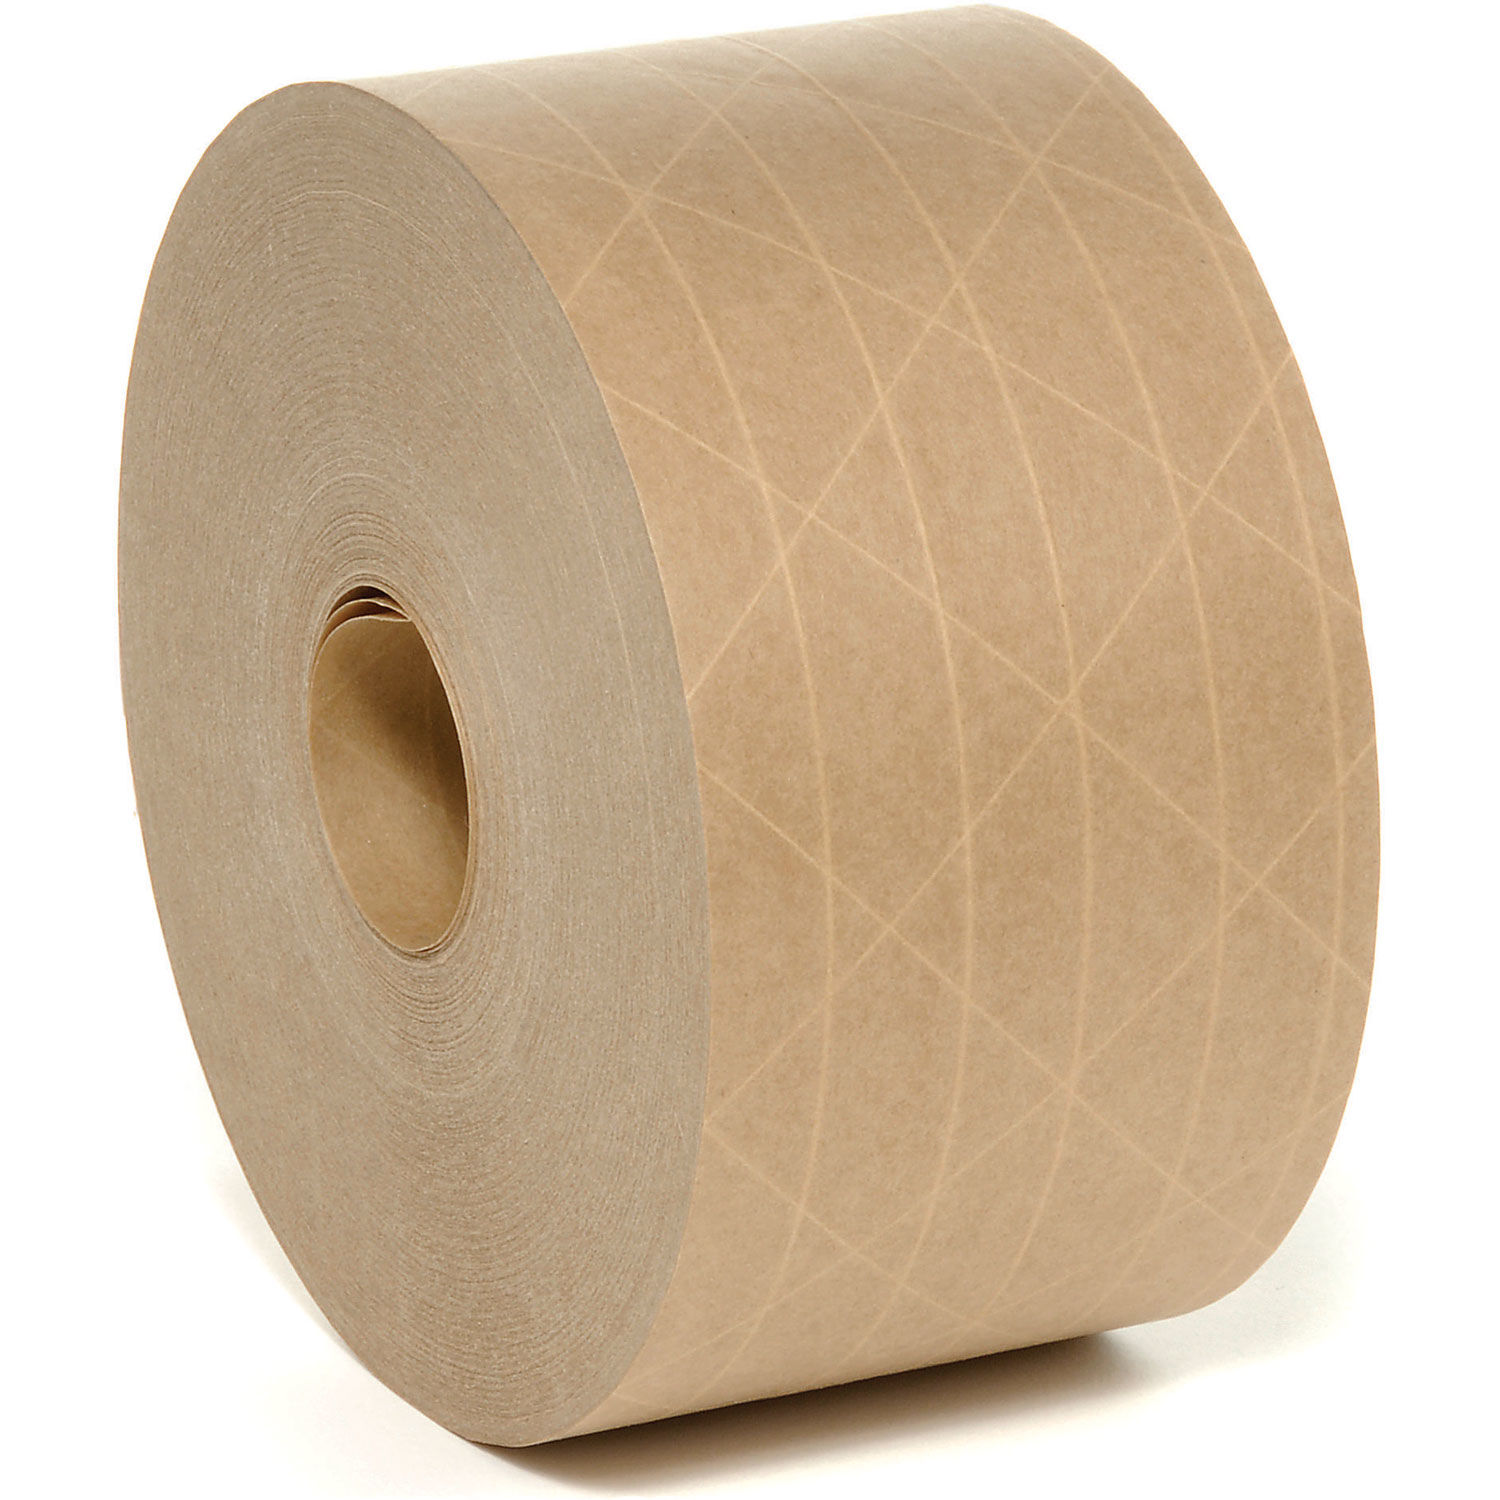 UOFFICE 6 Rolls Paper Tape Water Activated Reinforced 3&quot; x 500' Kraft Paper Tape